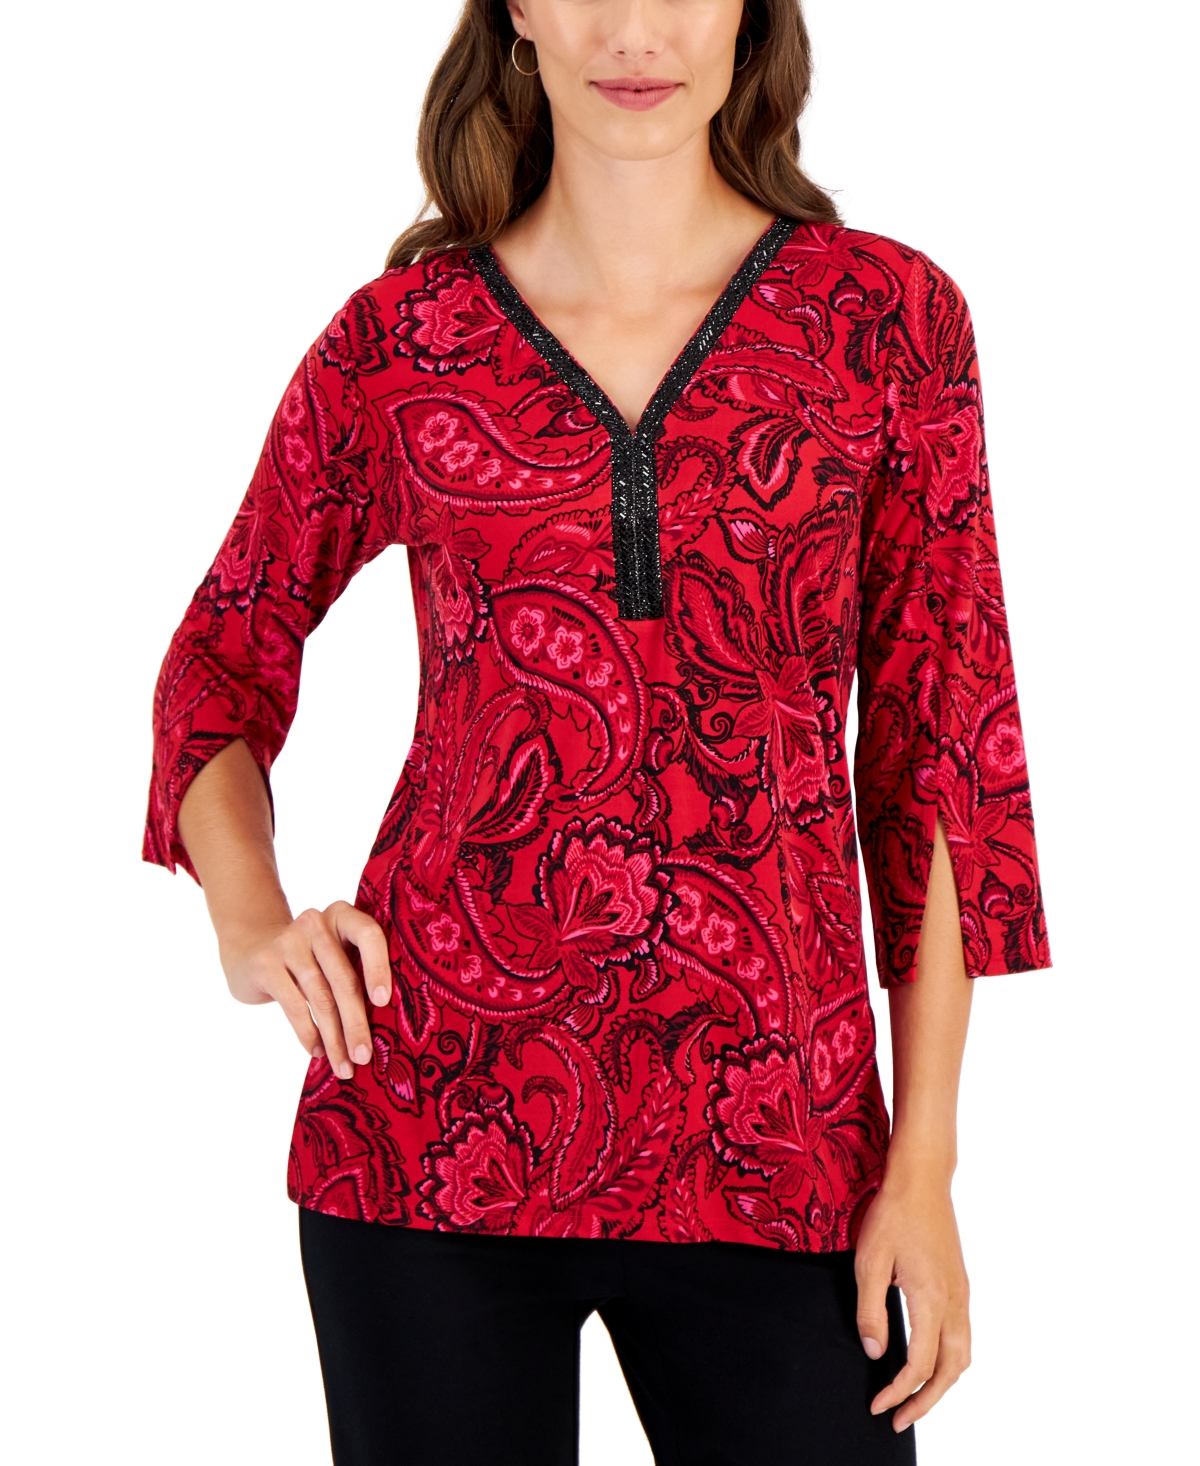 Jm Collection Women's Embellished Paisley-Print 3/4-Sleeve Top, Created for Macy's